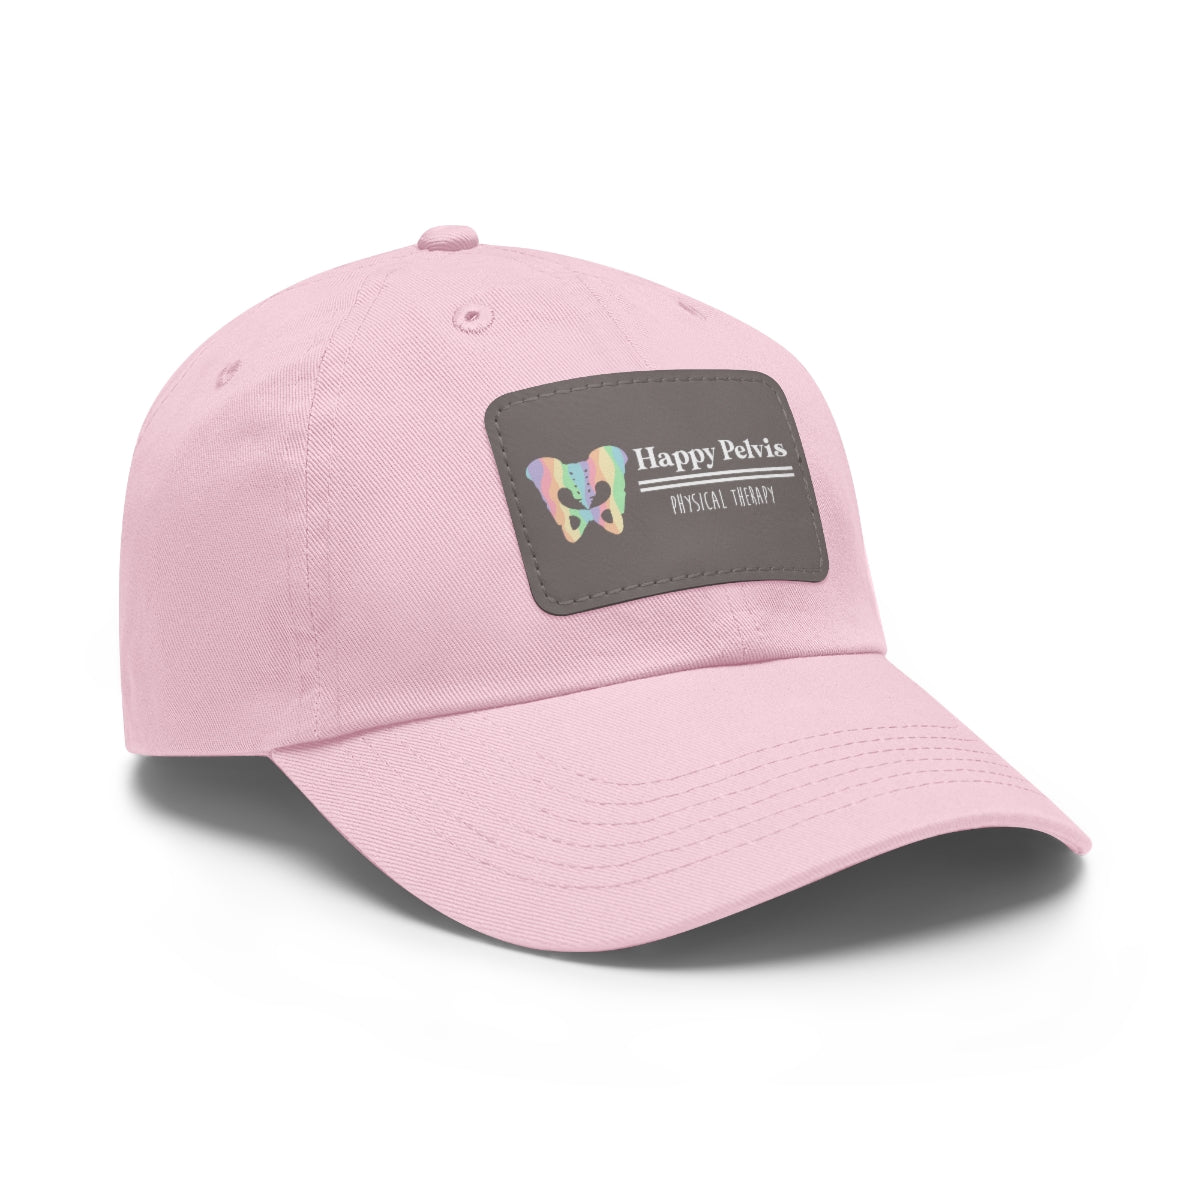 Happy Pelvis Physical Therapy Hat